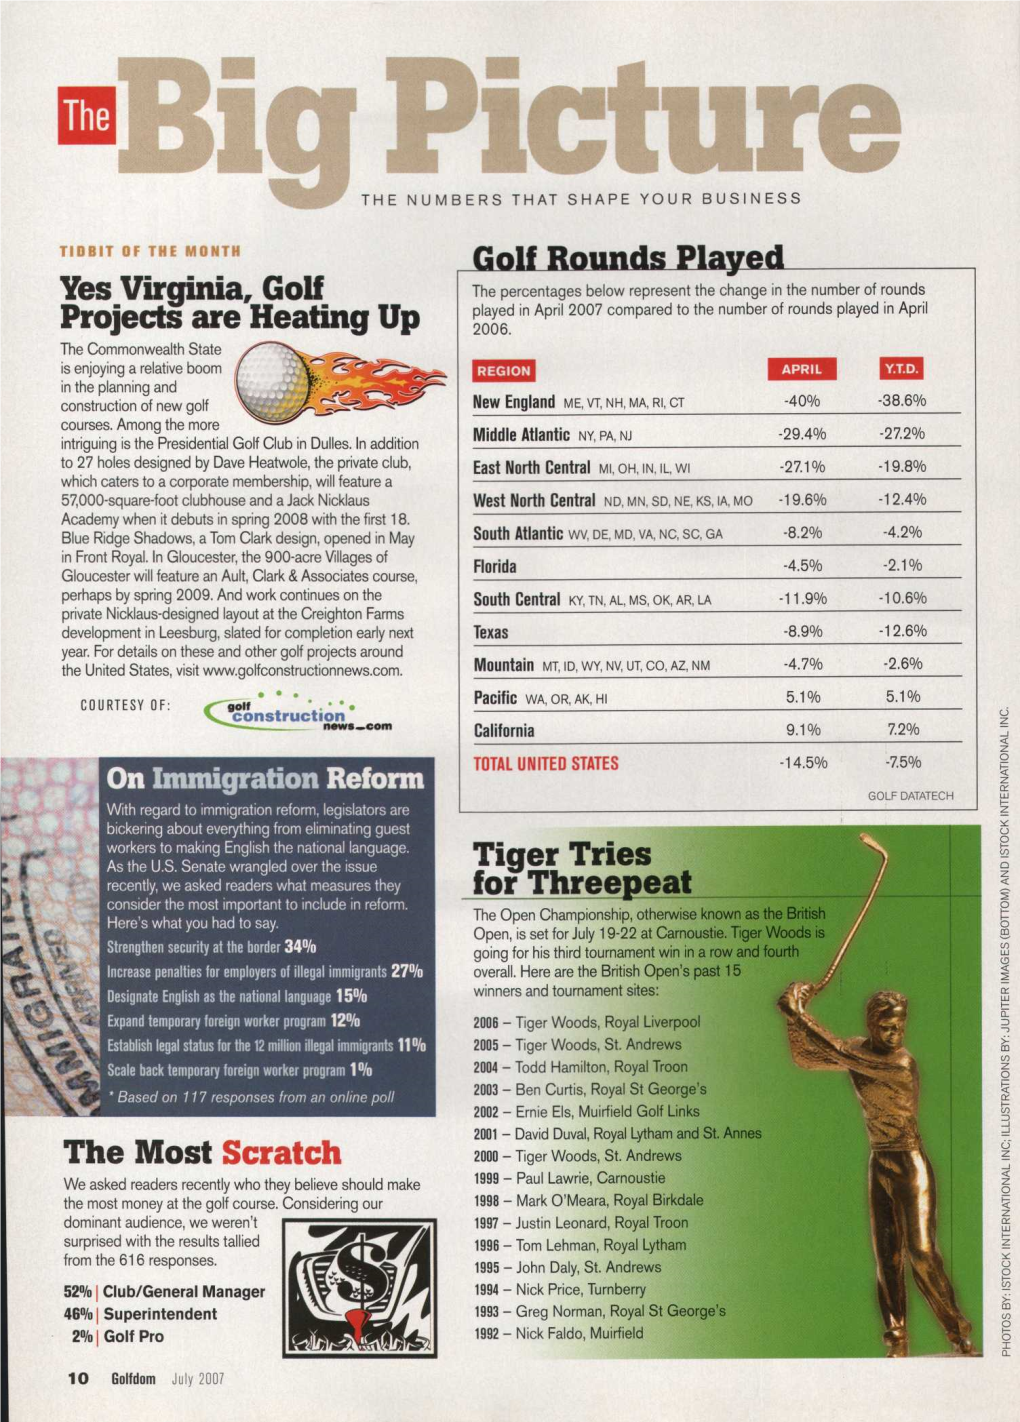 Yes Virginia, Golf Projects Are Heating up the Most Scratch Tiger Tries For